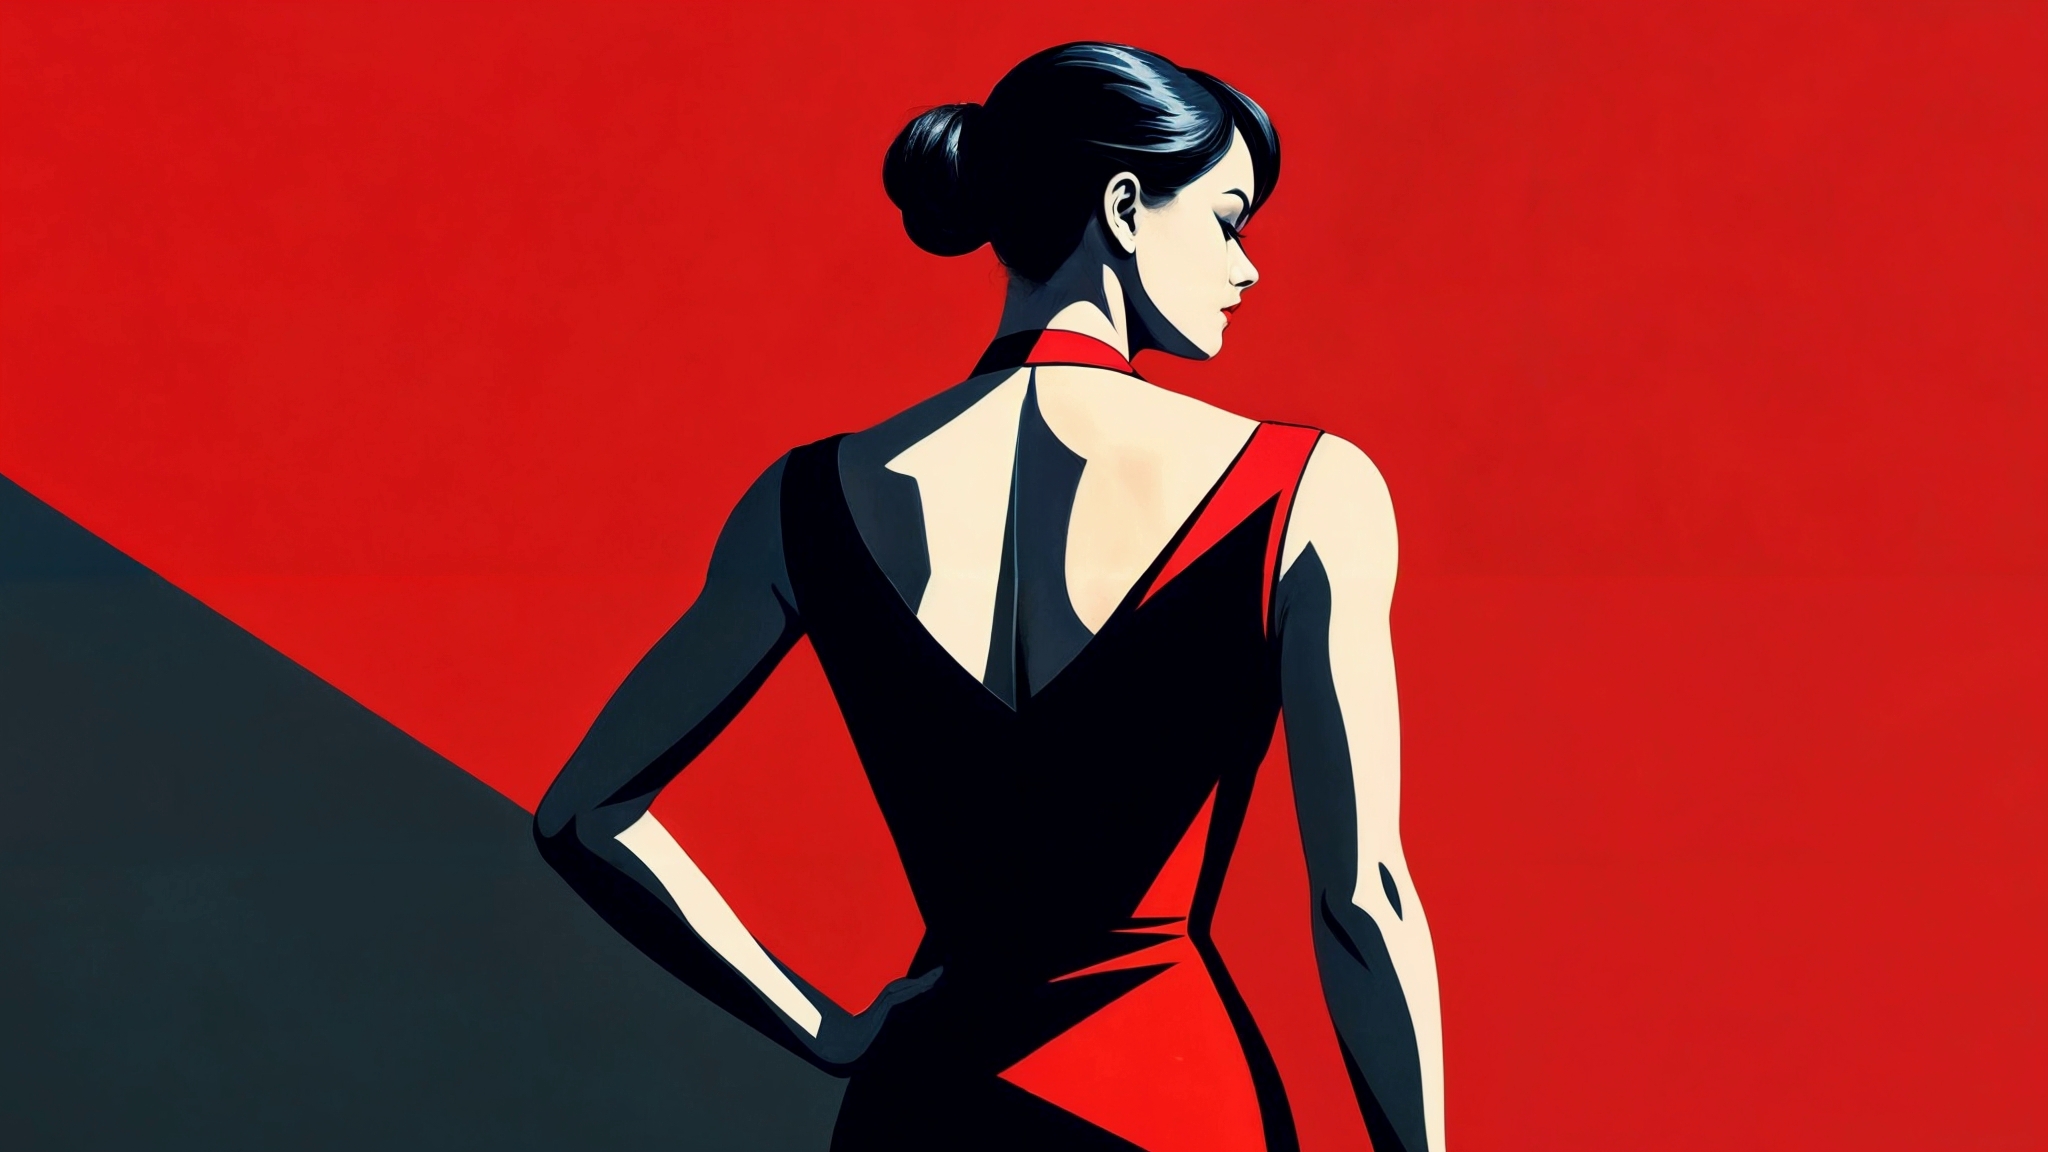 Drawing of a girl in a dress on a black and red background